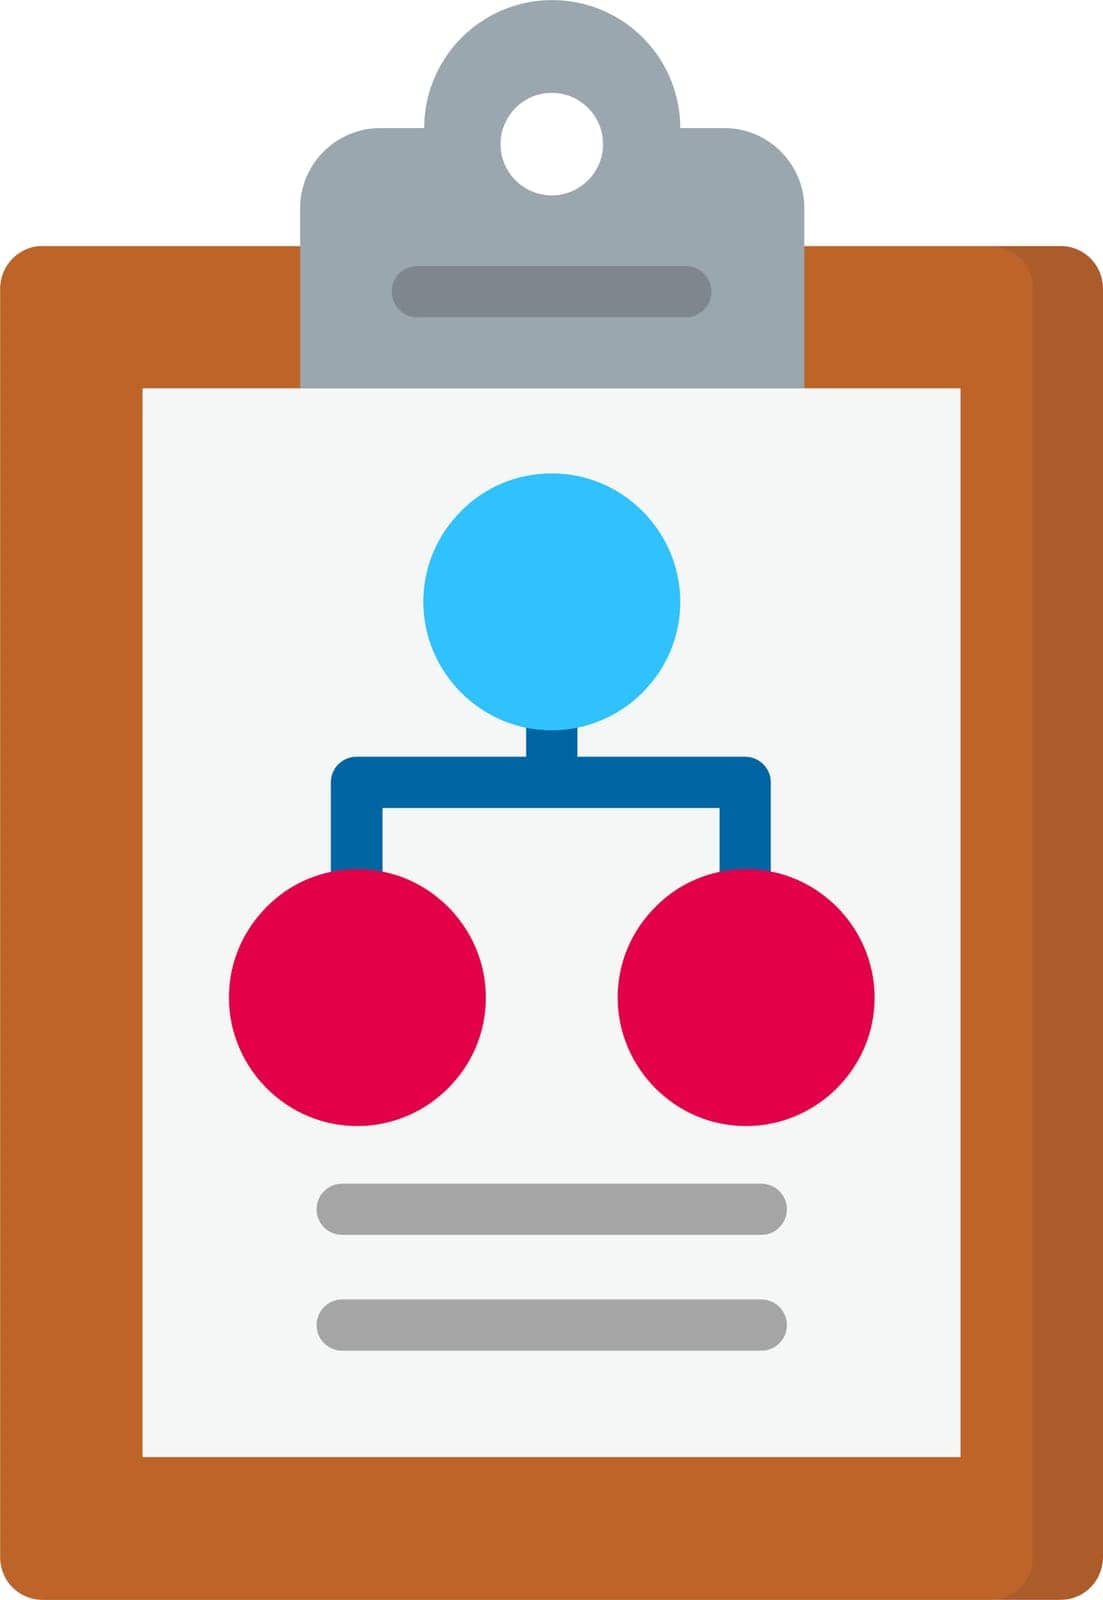 Flow Chart Icon image. Suitable for mobile application.